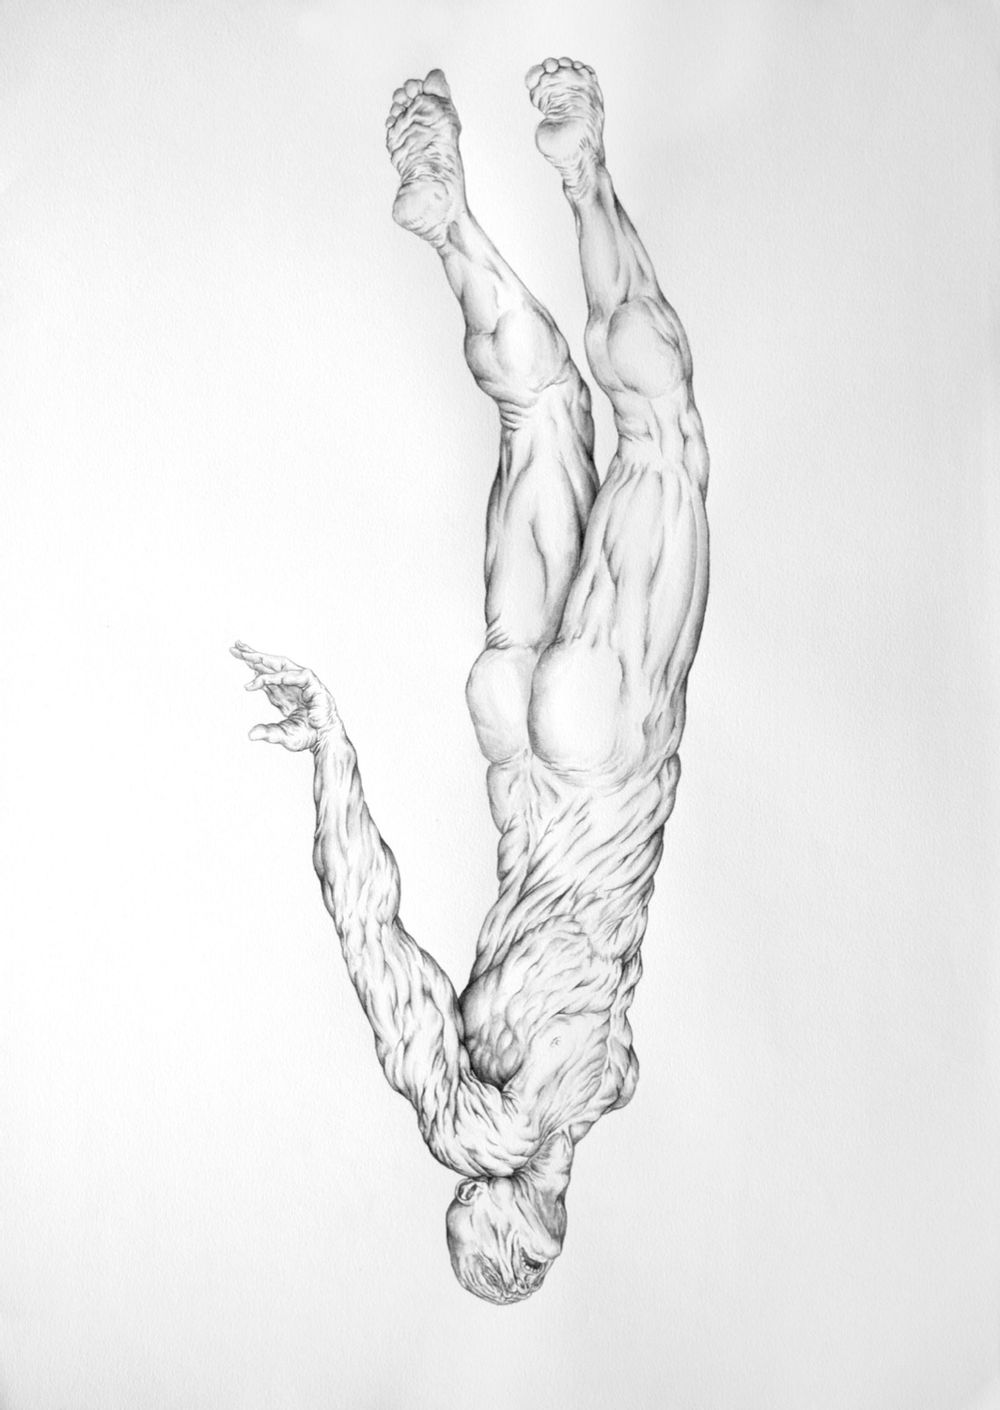 Planktonian People II, 2013, ink on paper, 16.5(h) x 23.25(w) inches